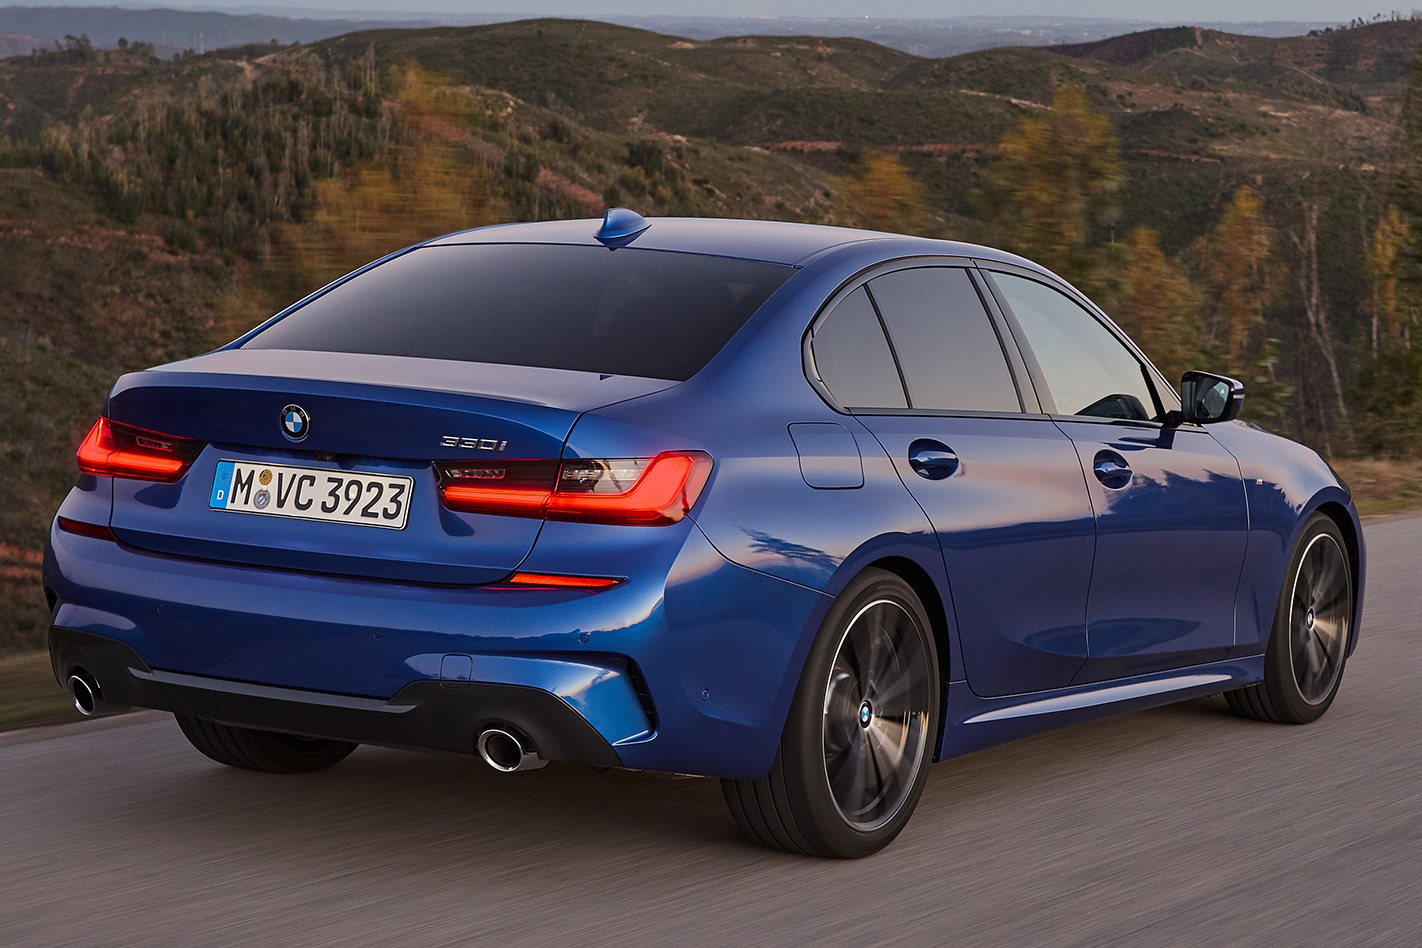 2019 BMW 3 Series full range price and features announced